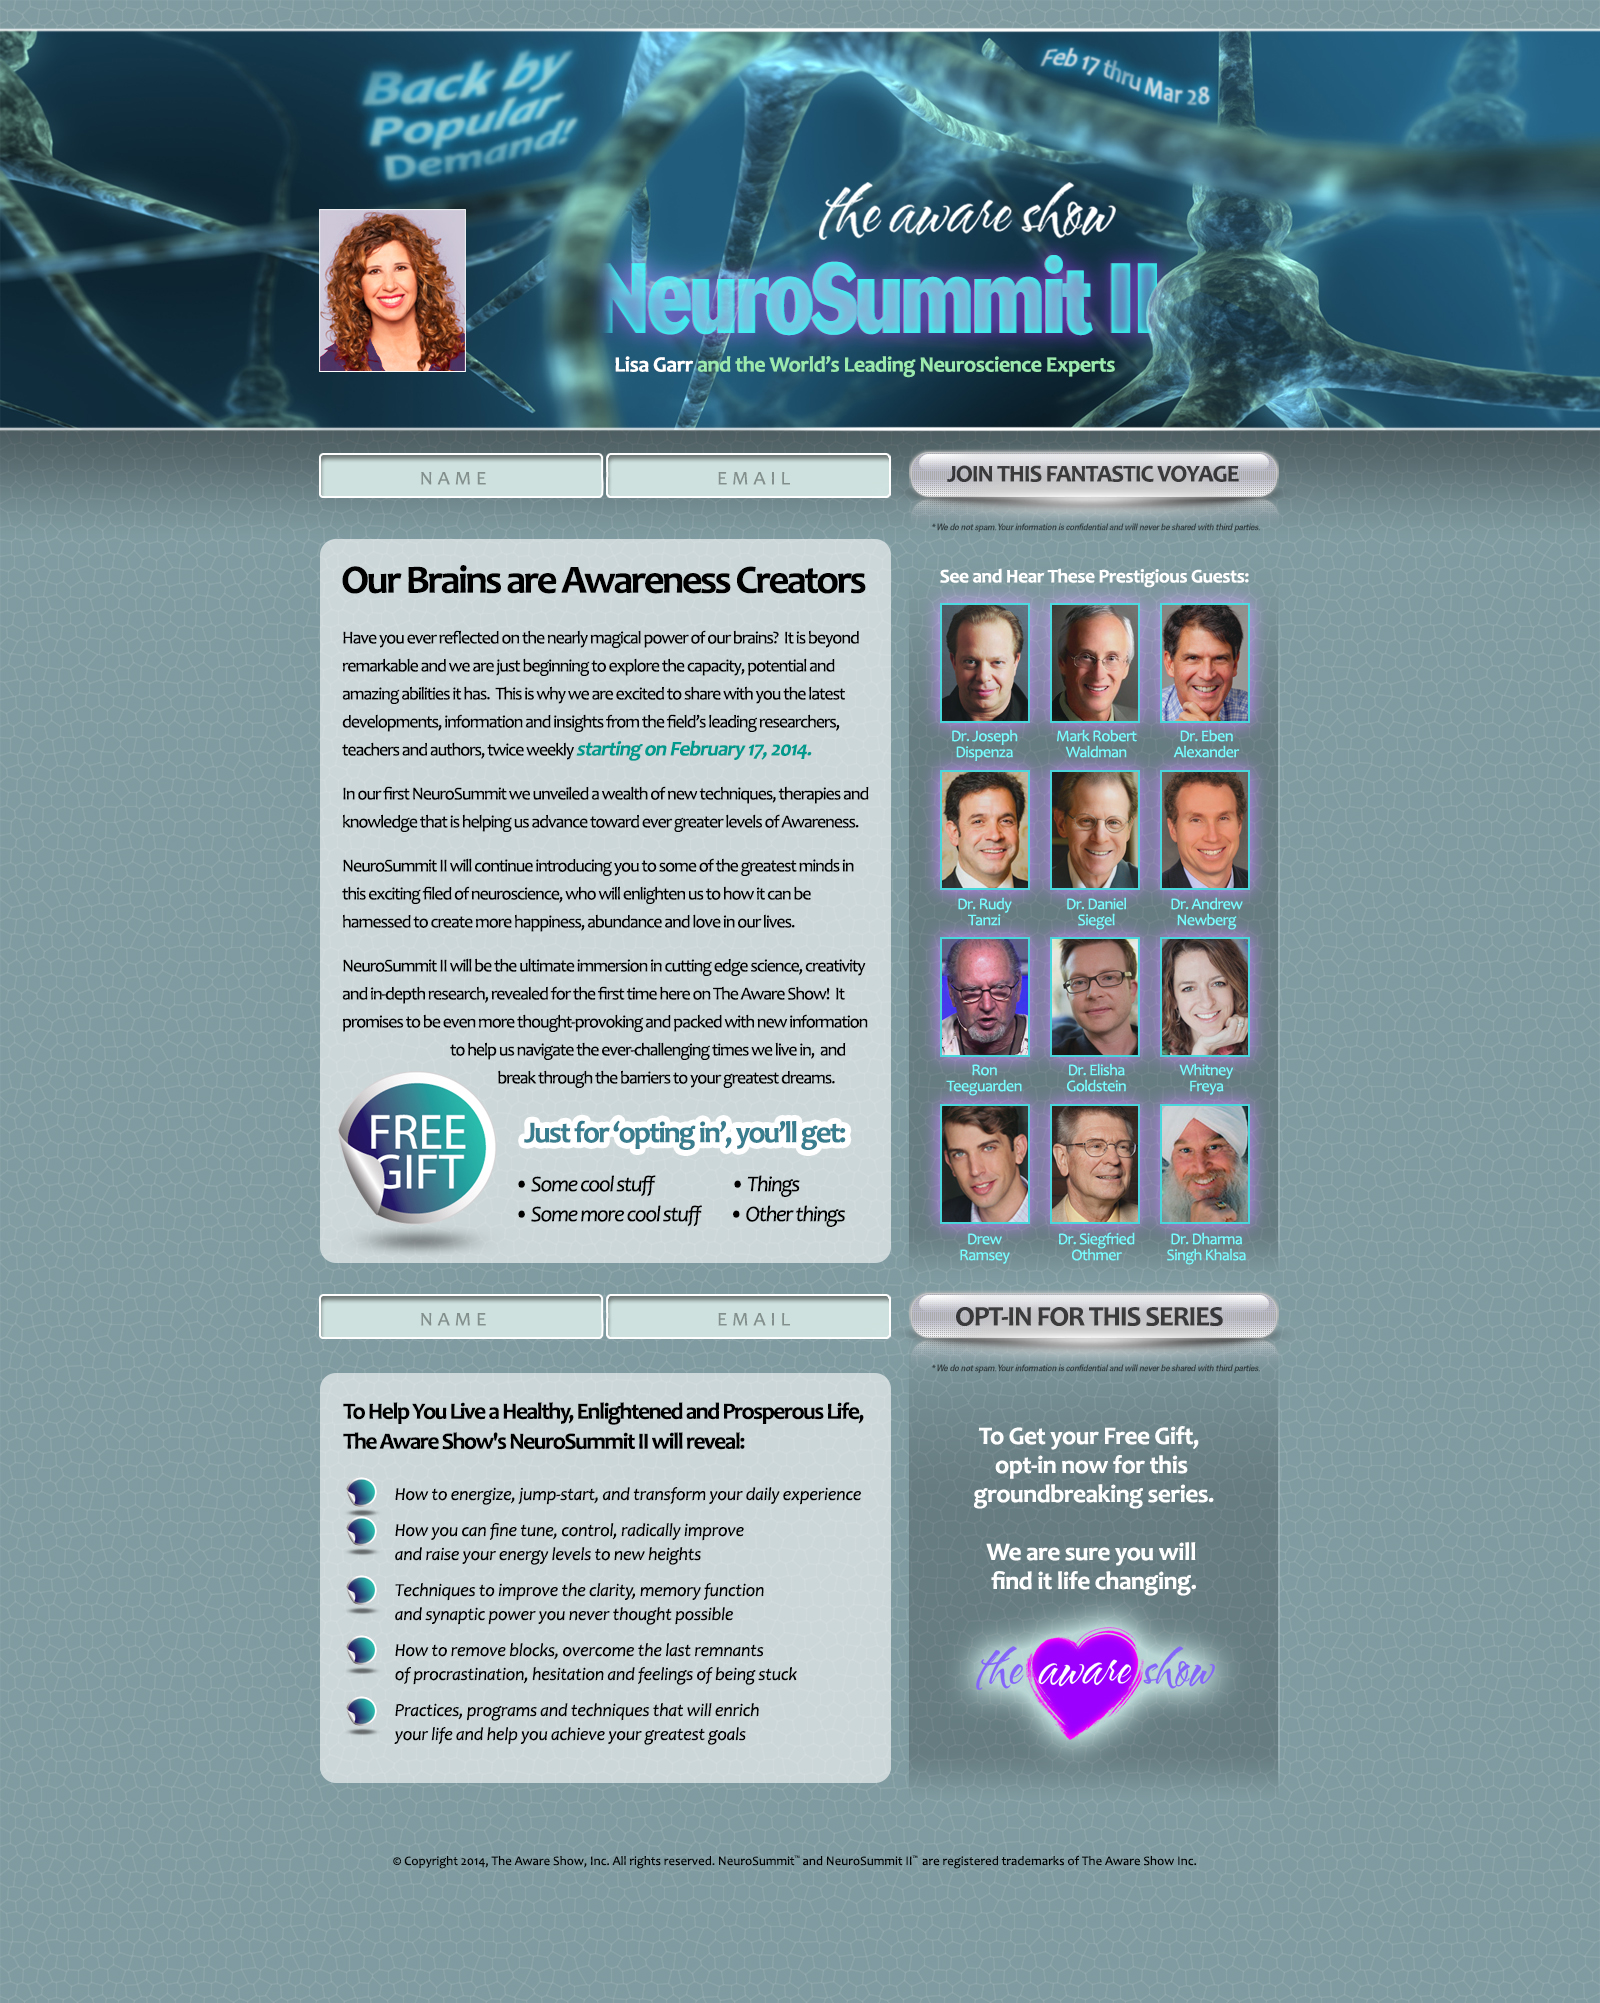 The Aware Show NeuroSummit II Squeeze Pages